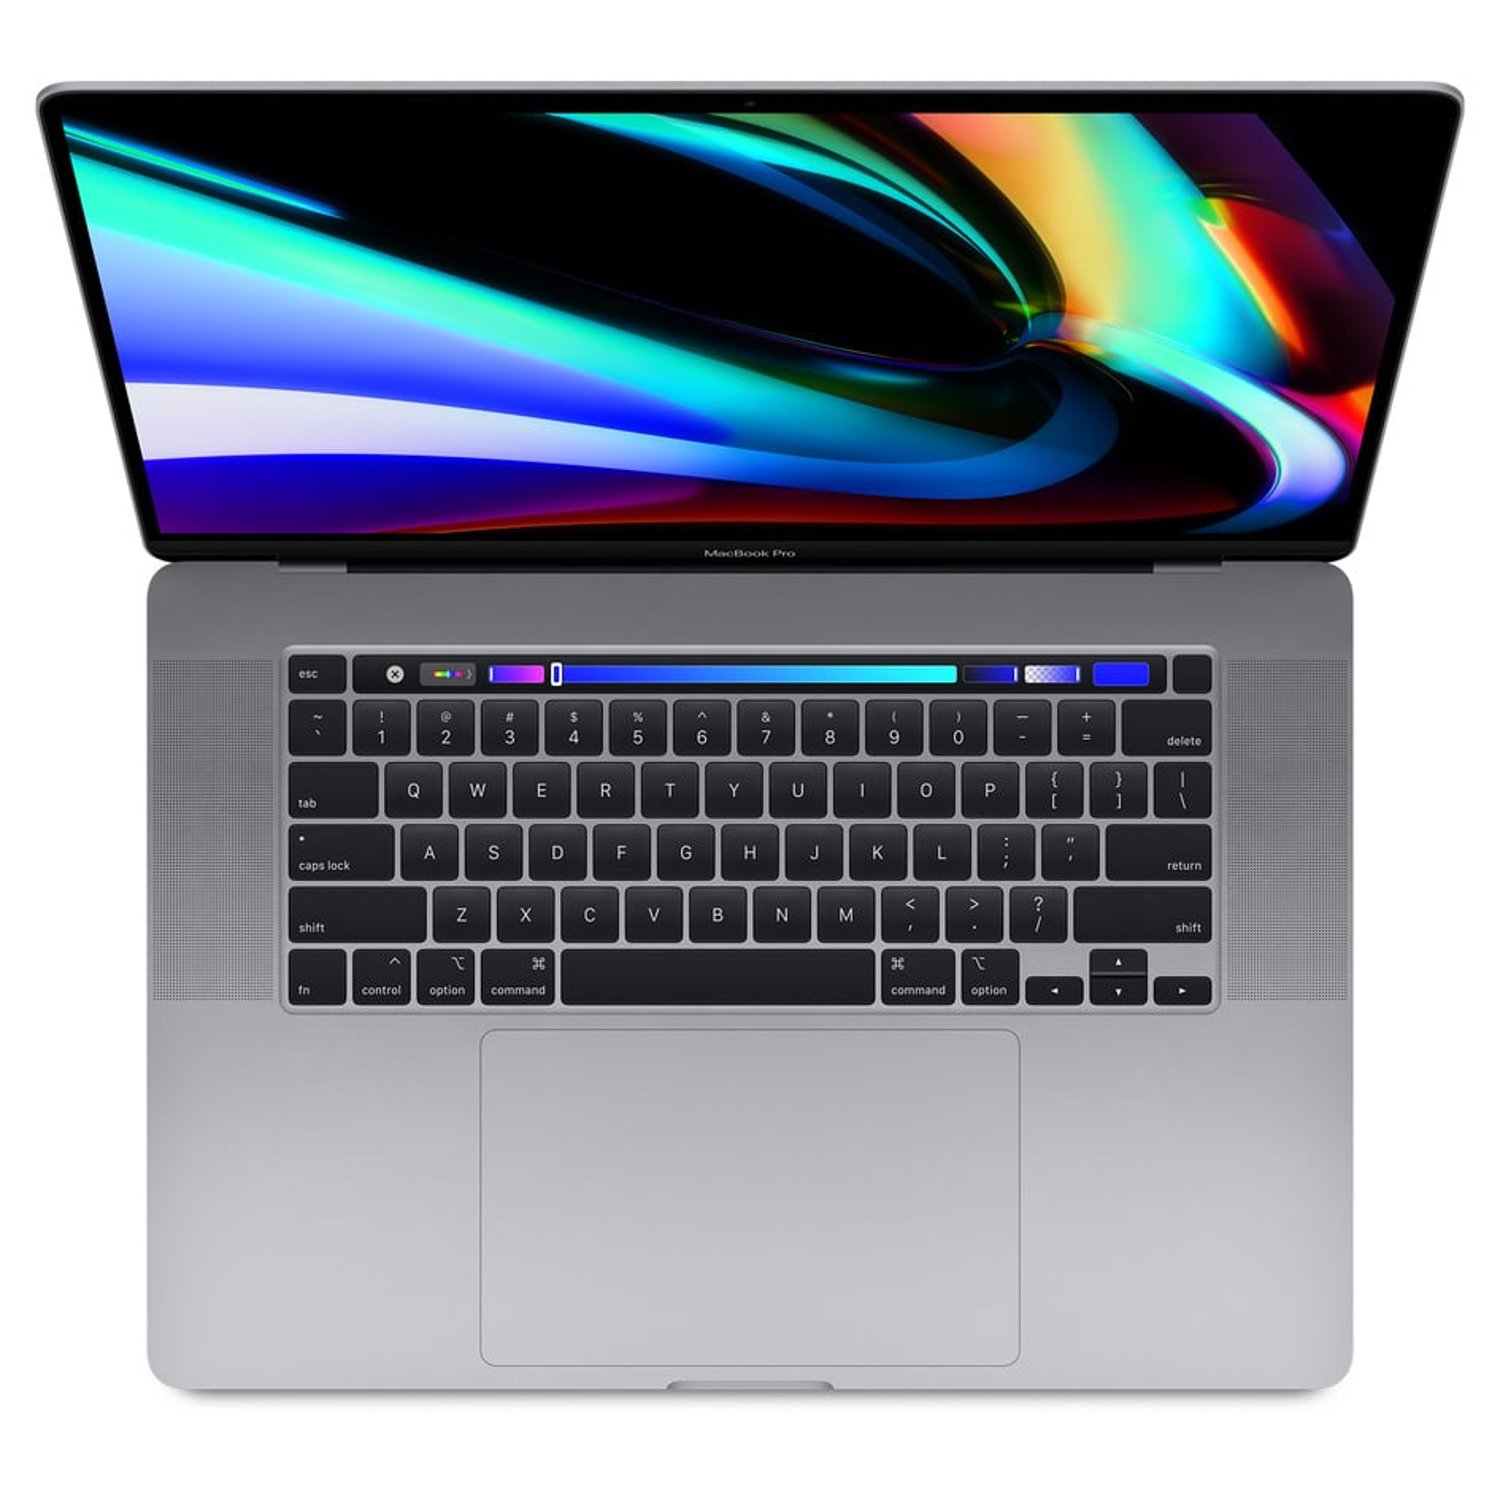 Apple MacBook Pro A1989 (2018) Core i5 2.3GHz | 8GB RAM | 256GB SSD | 13 inch Touch Bar | Gray